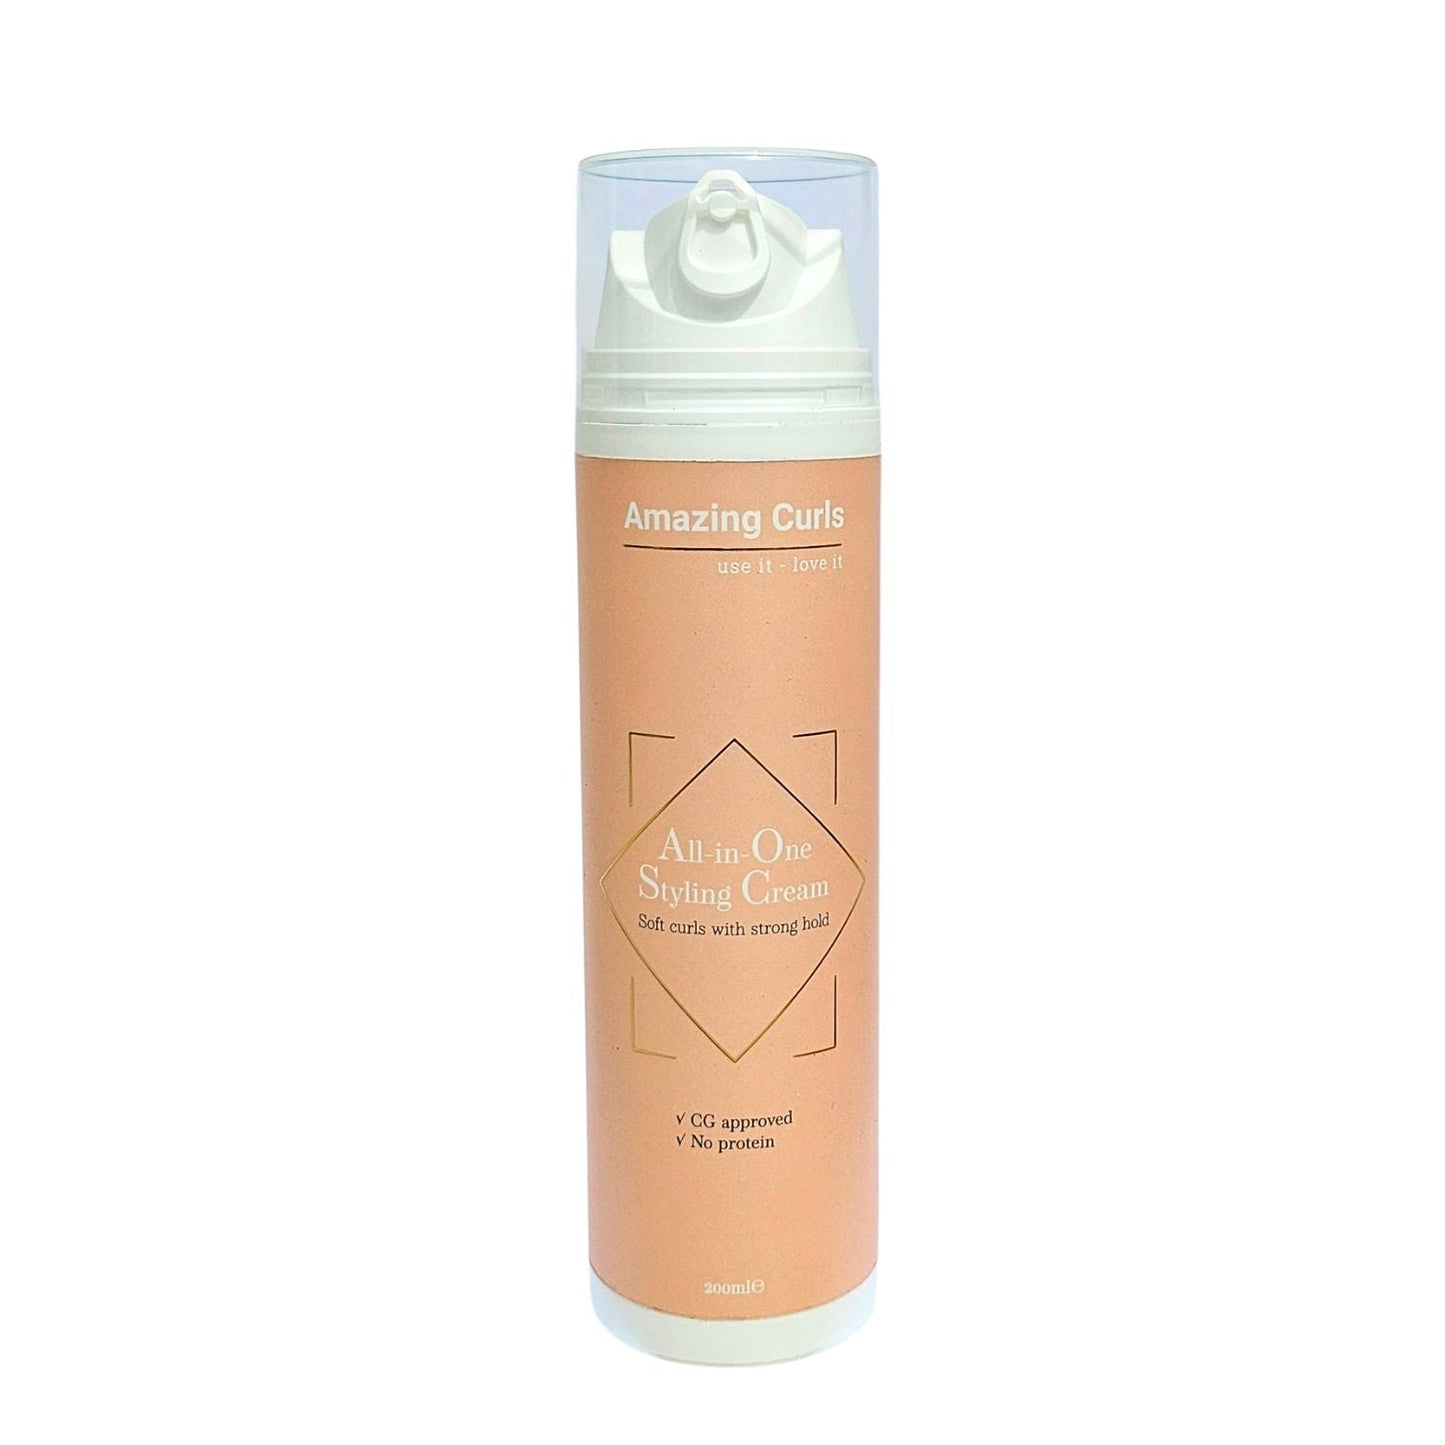 All-In-One Styling Crème - Sterke Houd Krullencrème